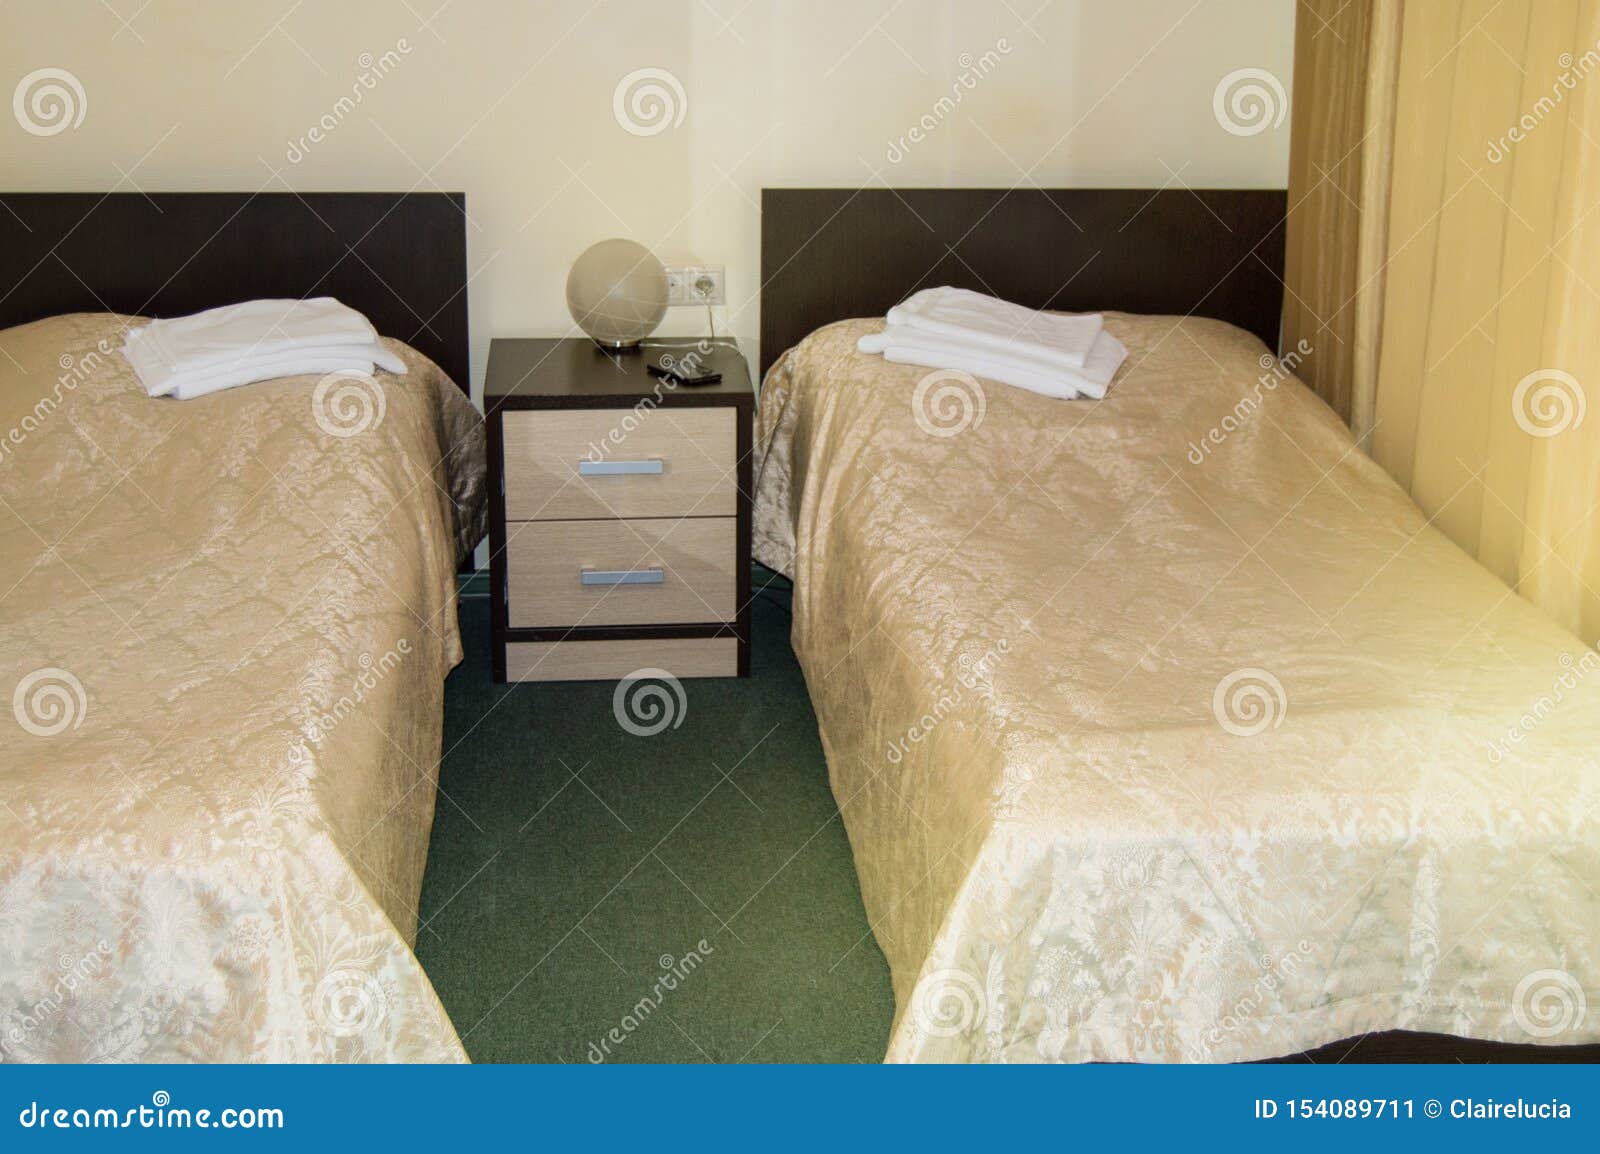 Modern Double Room With Two Single Beds Bedside Table Towels And